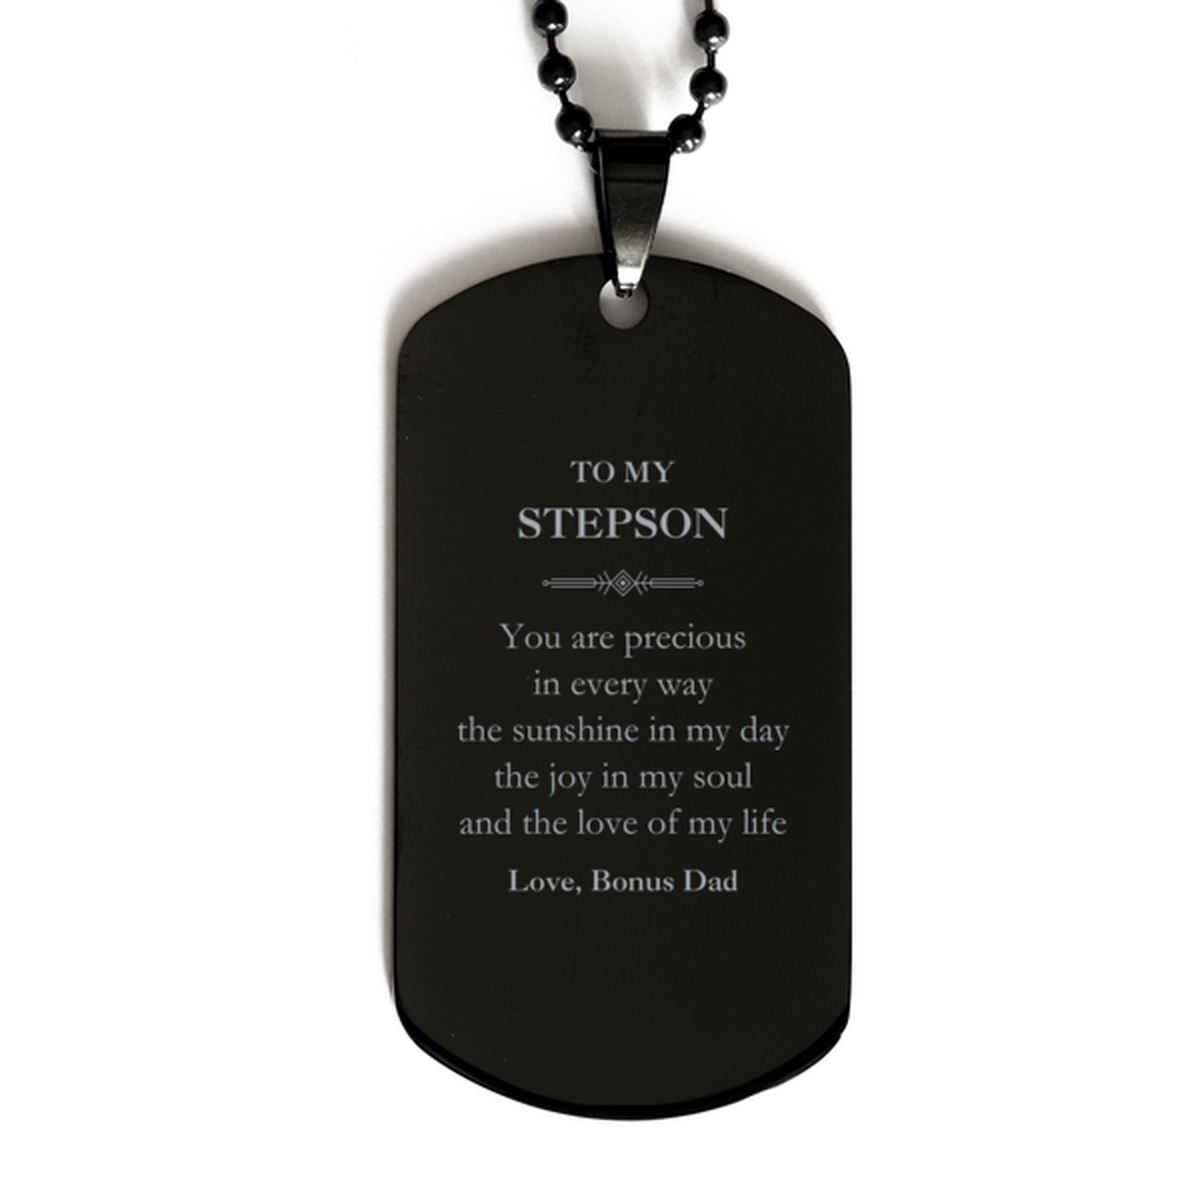 Graduation Gifts for Stepson Black Dog Tag Present from Bonus Dad, Christmas Stepson Birthday Gifts Stepson You are precious in every way the sunshine in my day. Love, Bonus Dad